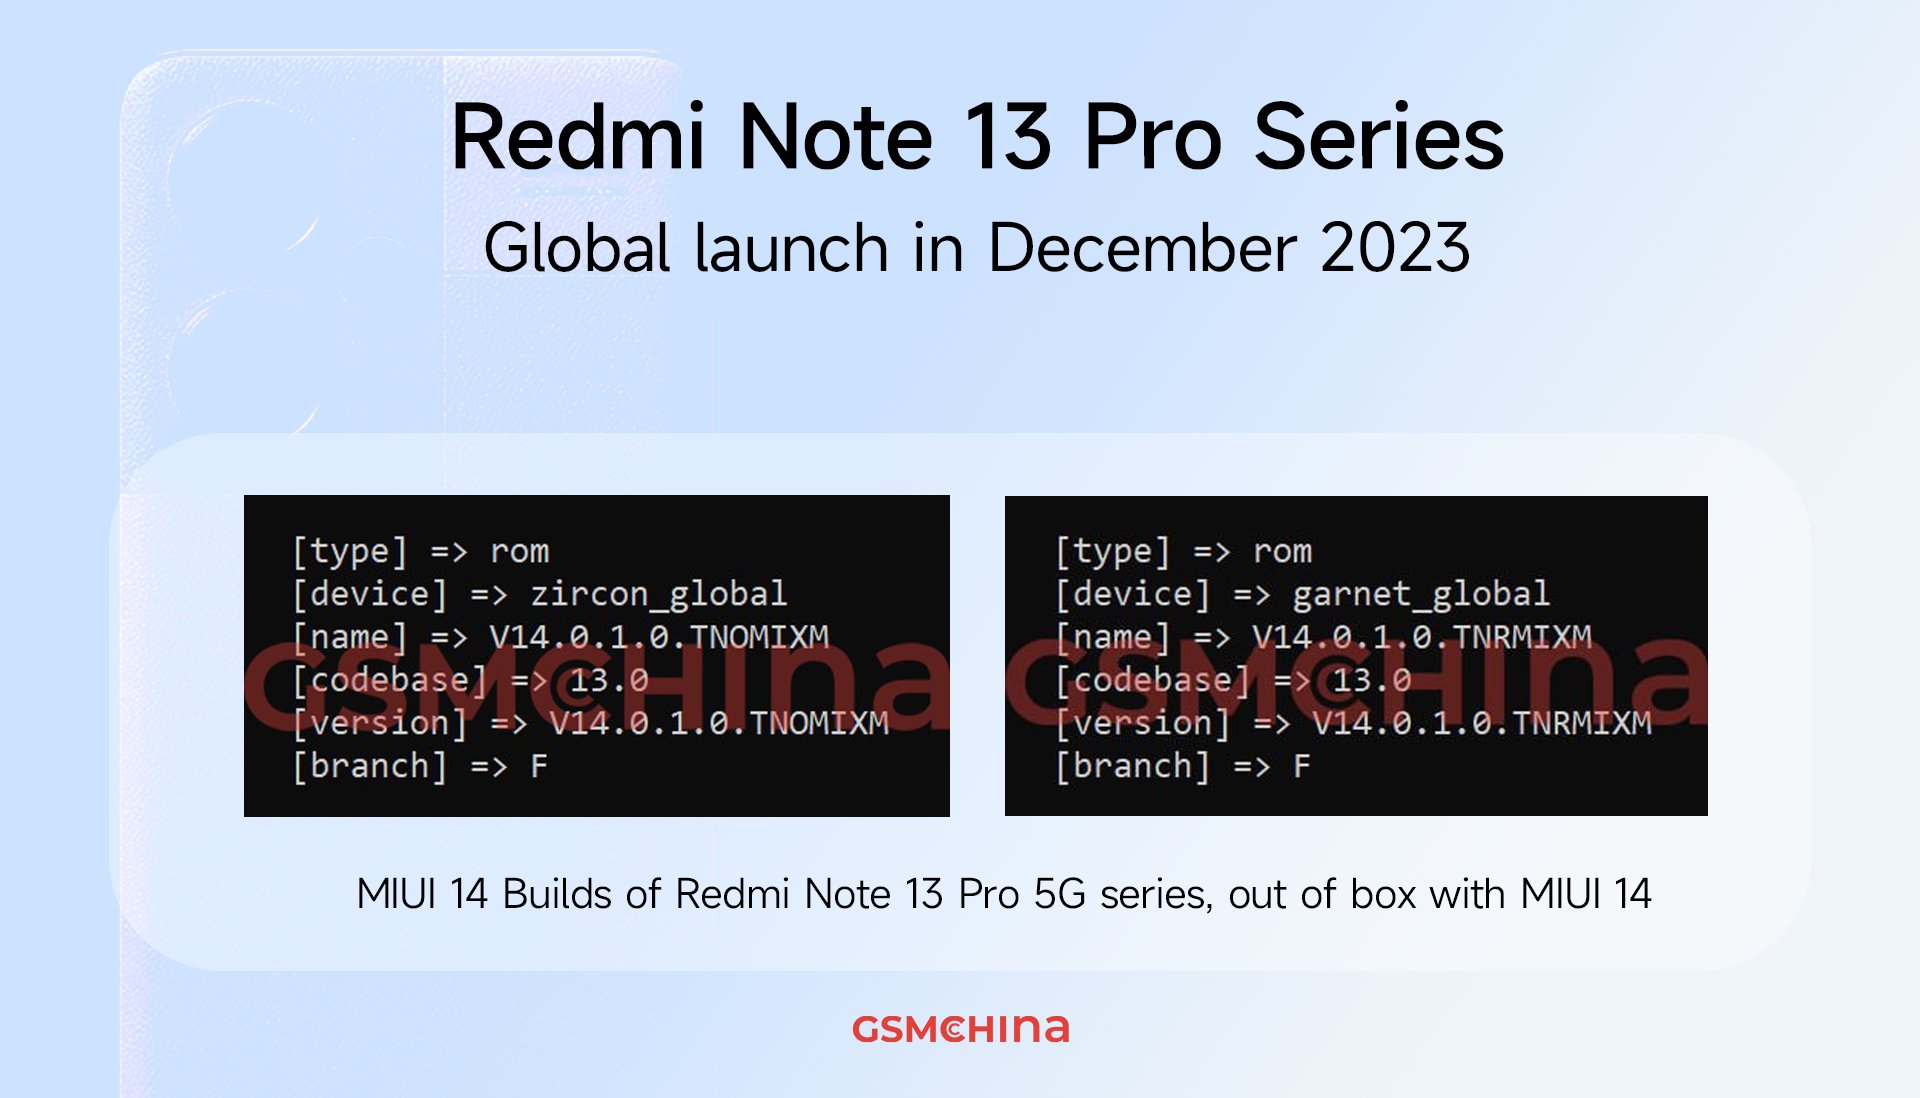 Xiaomi Redmi Note 13 series launch at 12 pm: Watch livestream, know specs